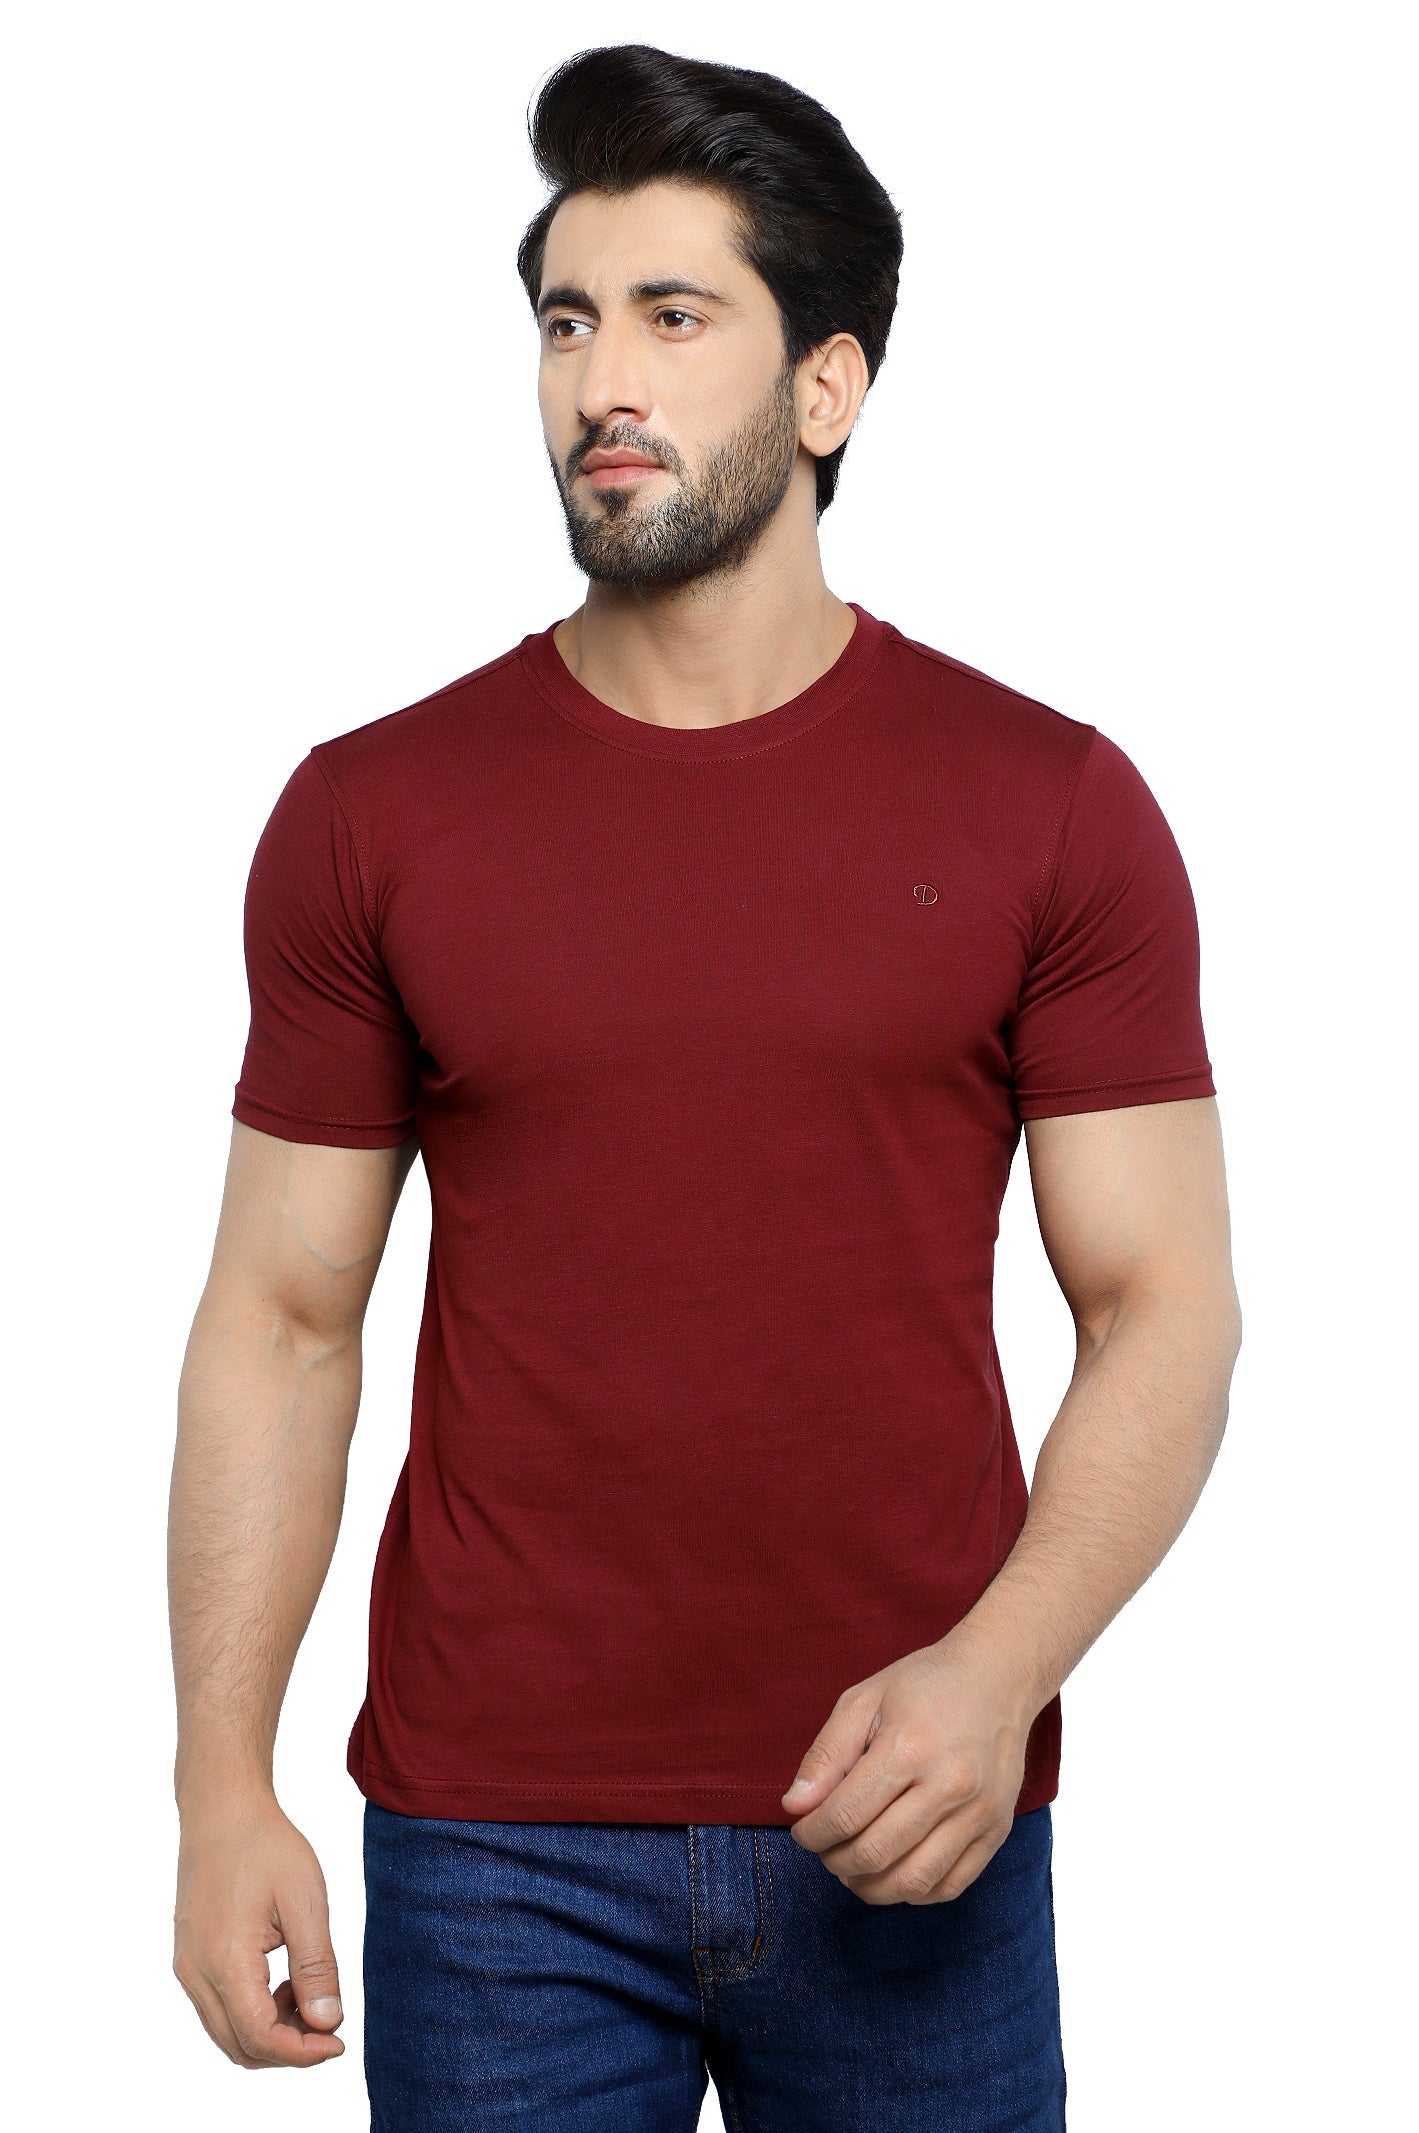 Diners Mens Round Neck T-Shirt SKU: NA856-MAROON - Diners